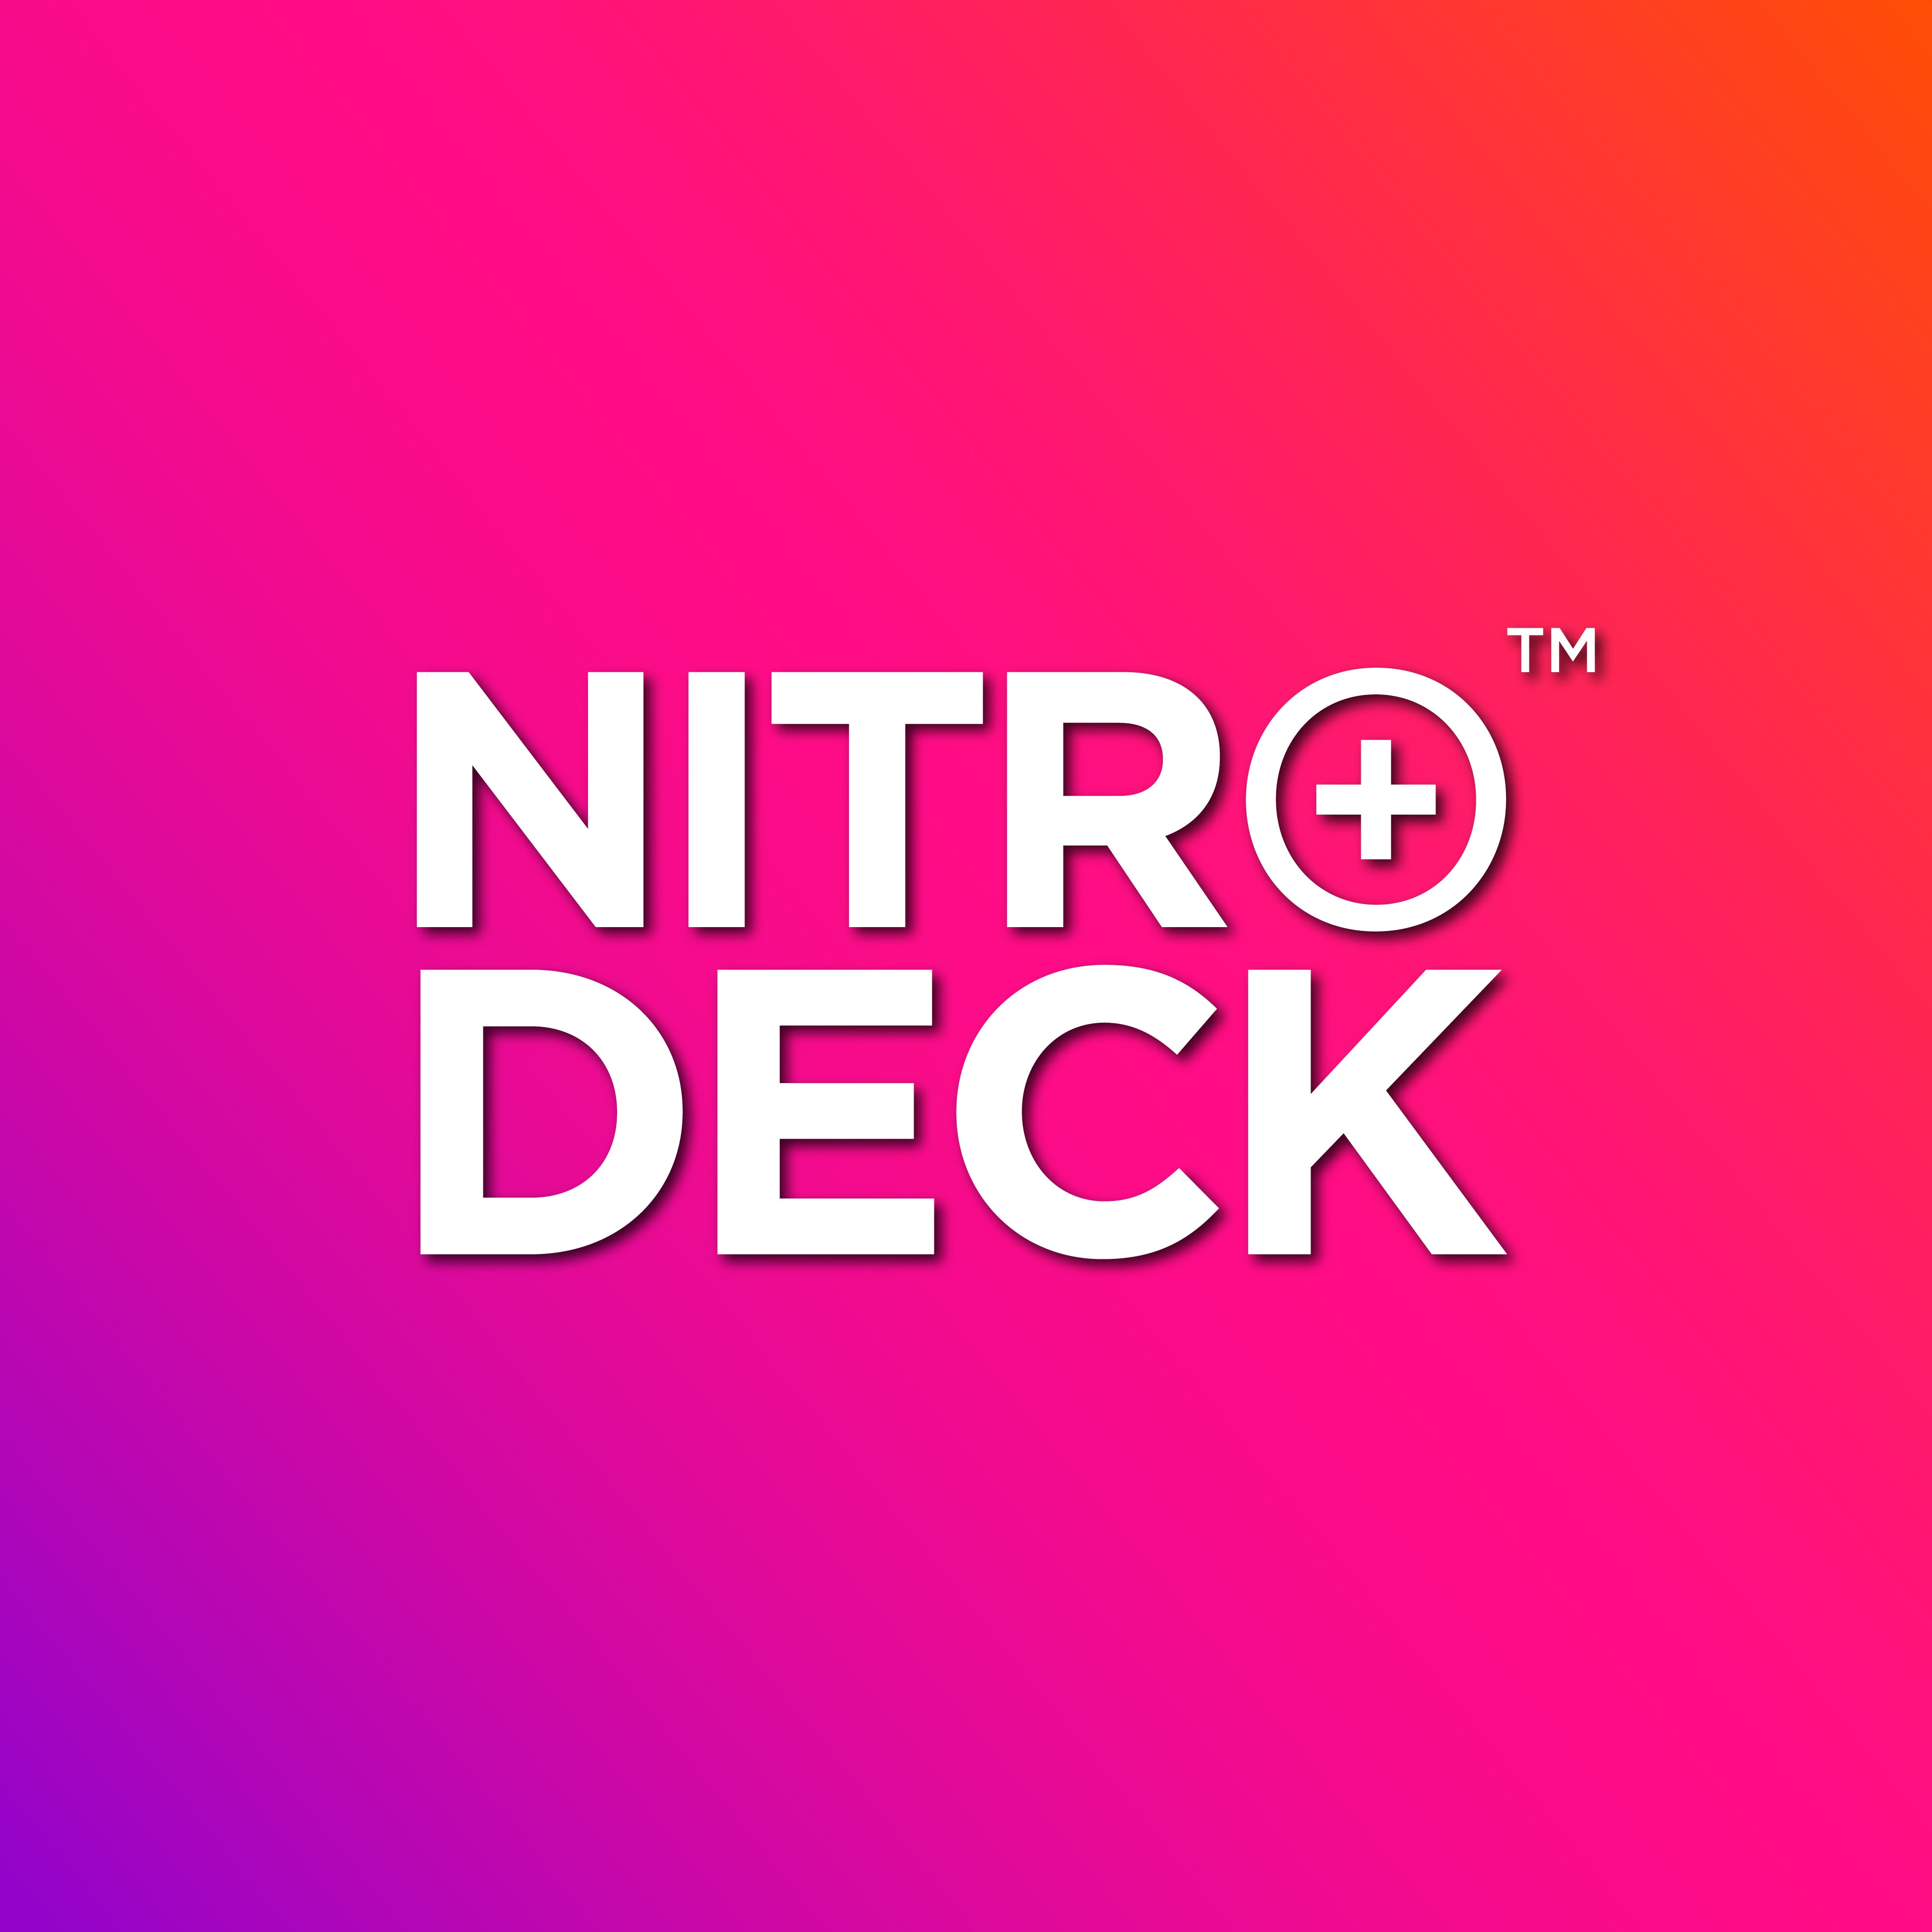 Announcing Nitro Deck+, a direct result of your community feedback!